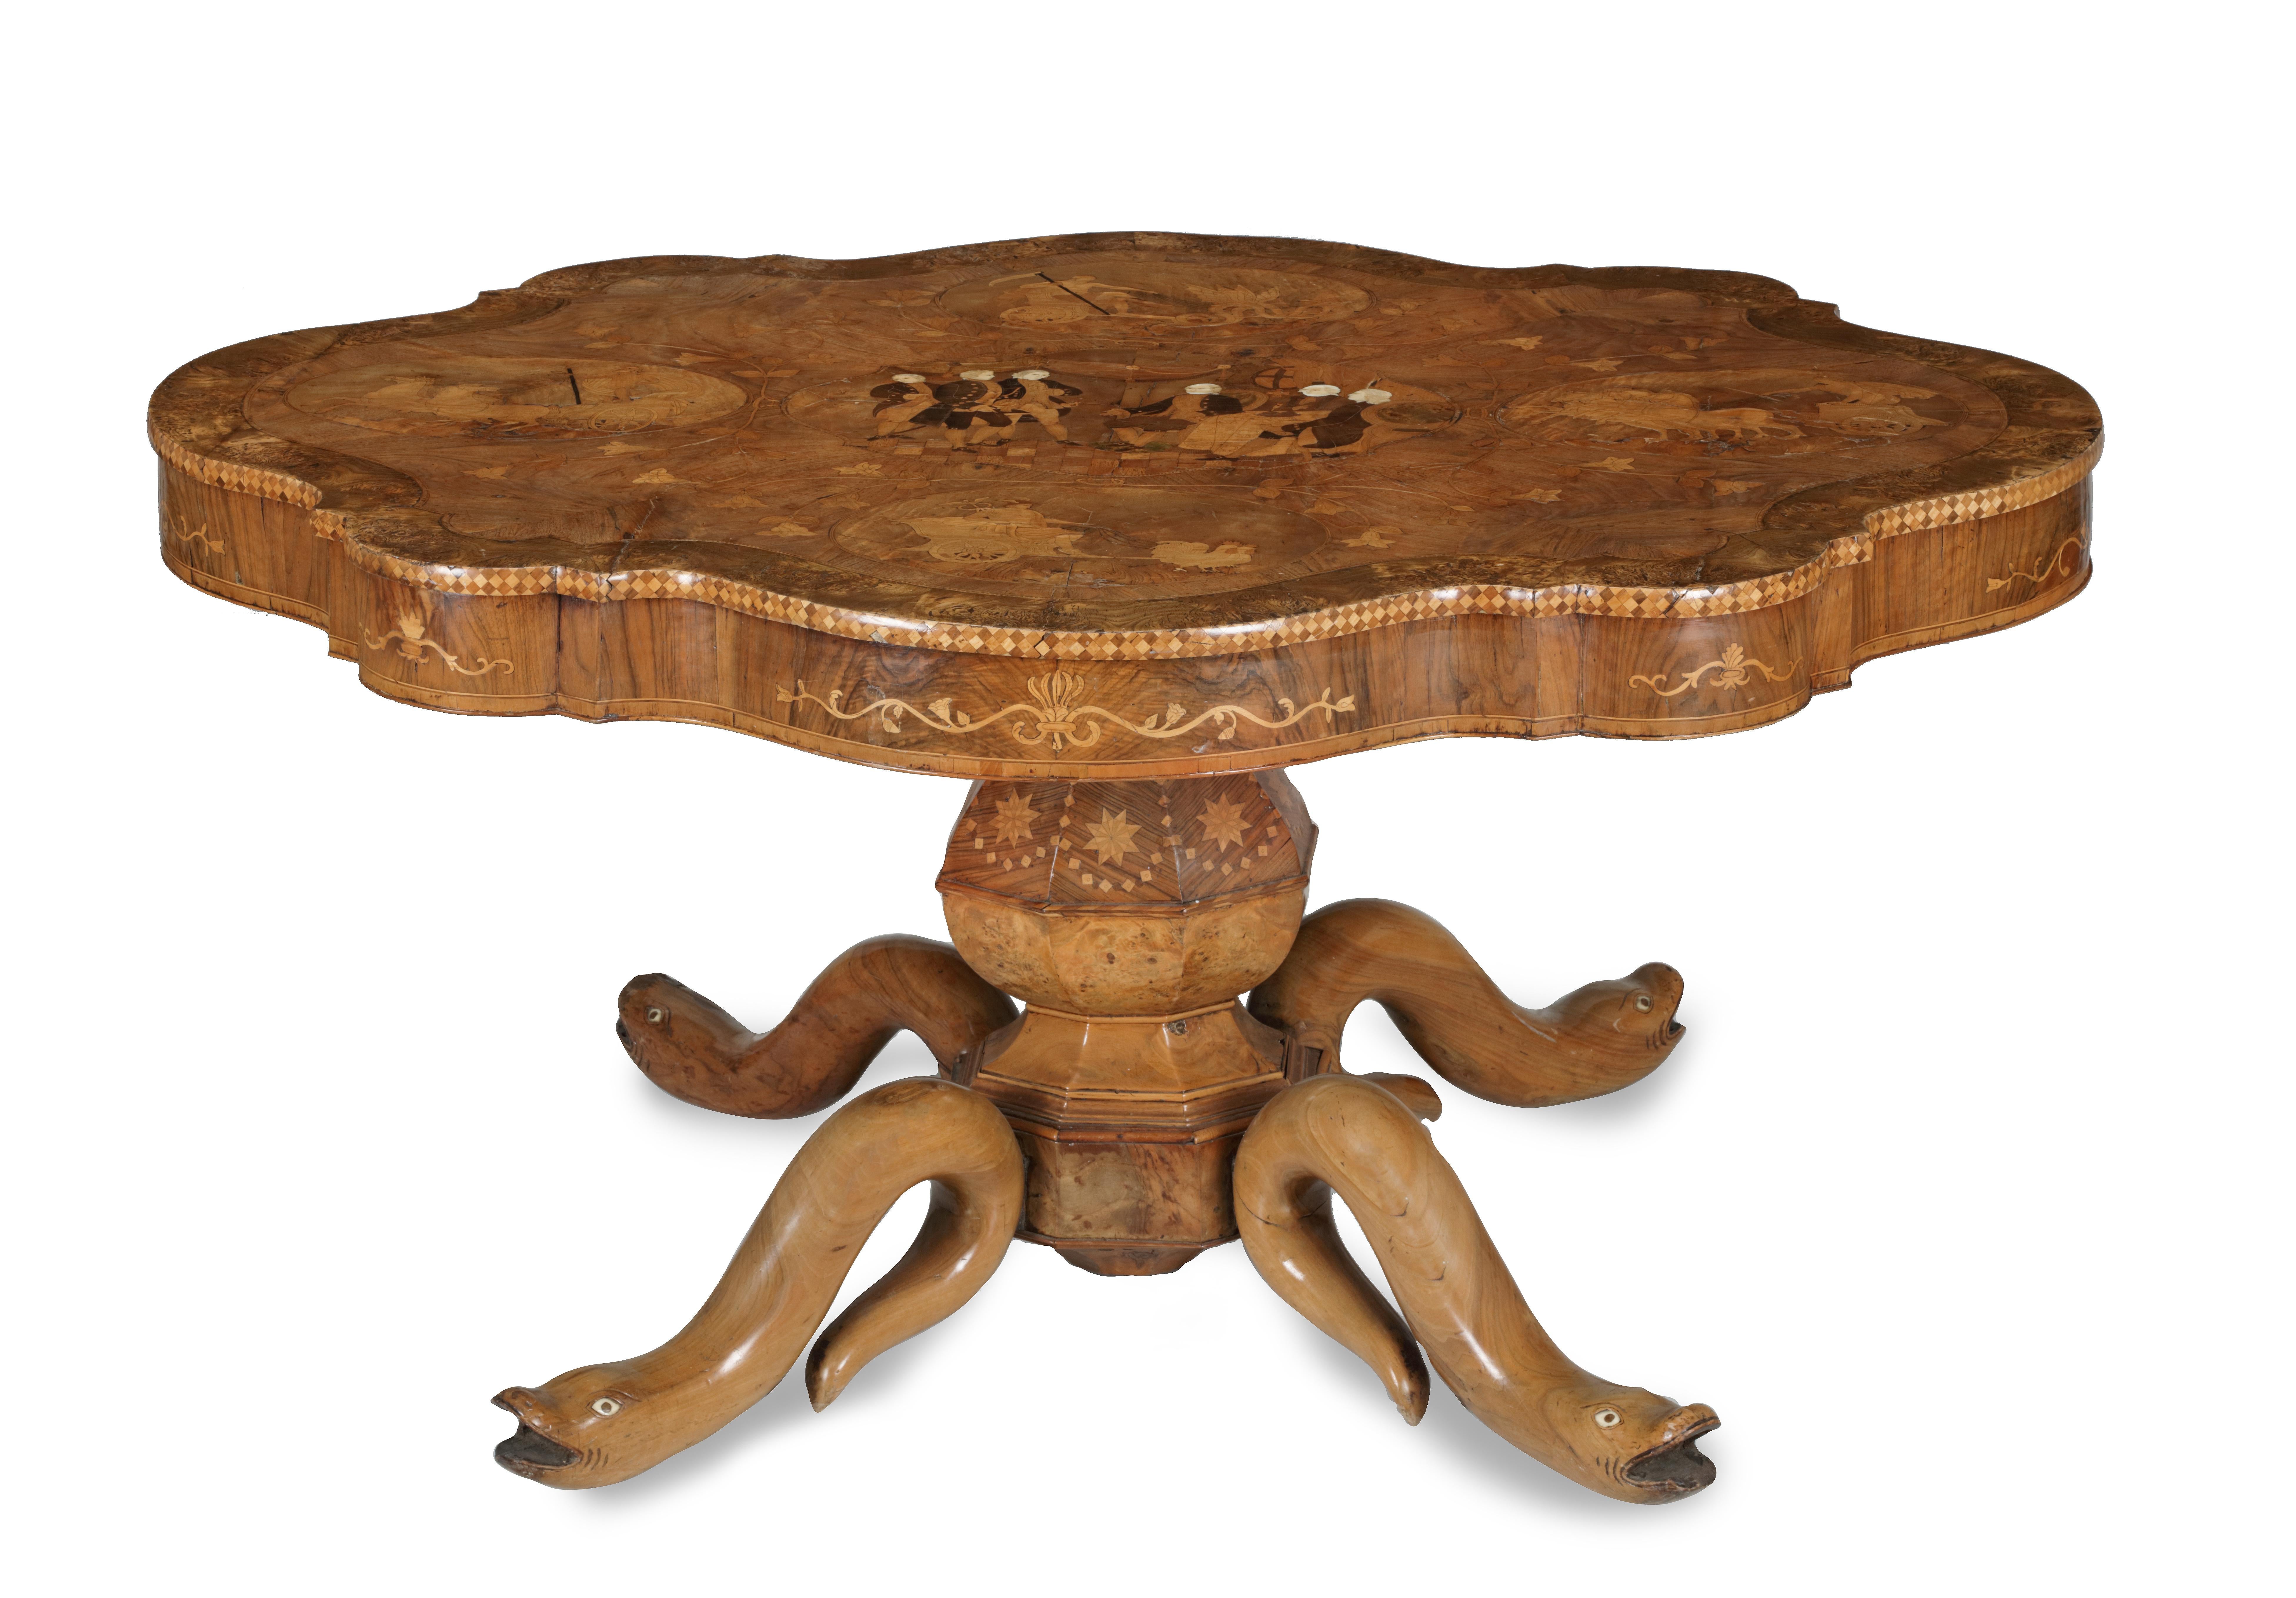 A very interesting centre table commemorating the Paris Treaty between the original thirteen states of the United States of America and Great Britain ending the American Revolution or War of Independence in 1783

France, or the United States of